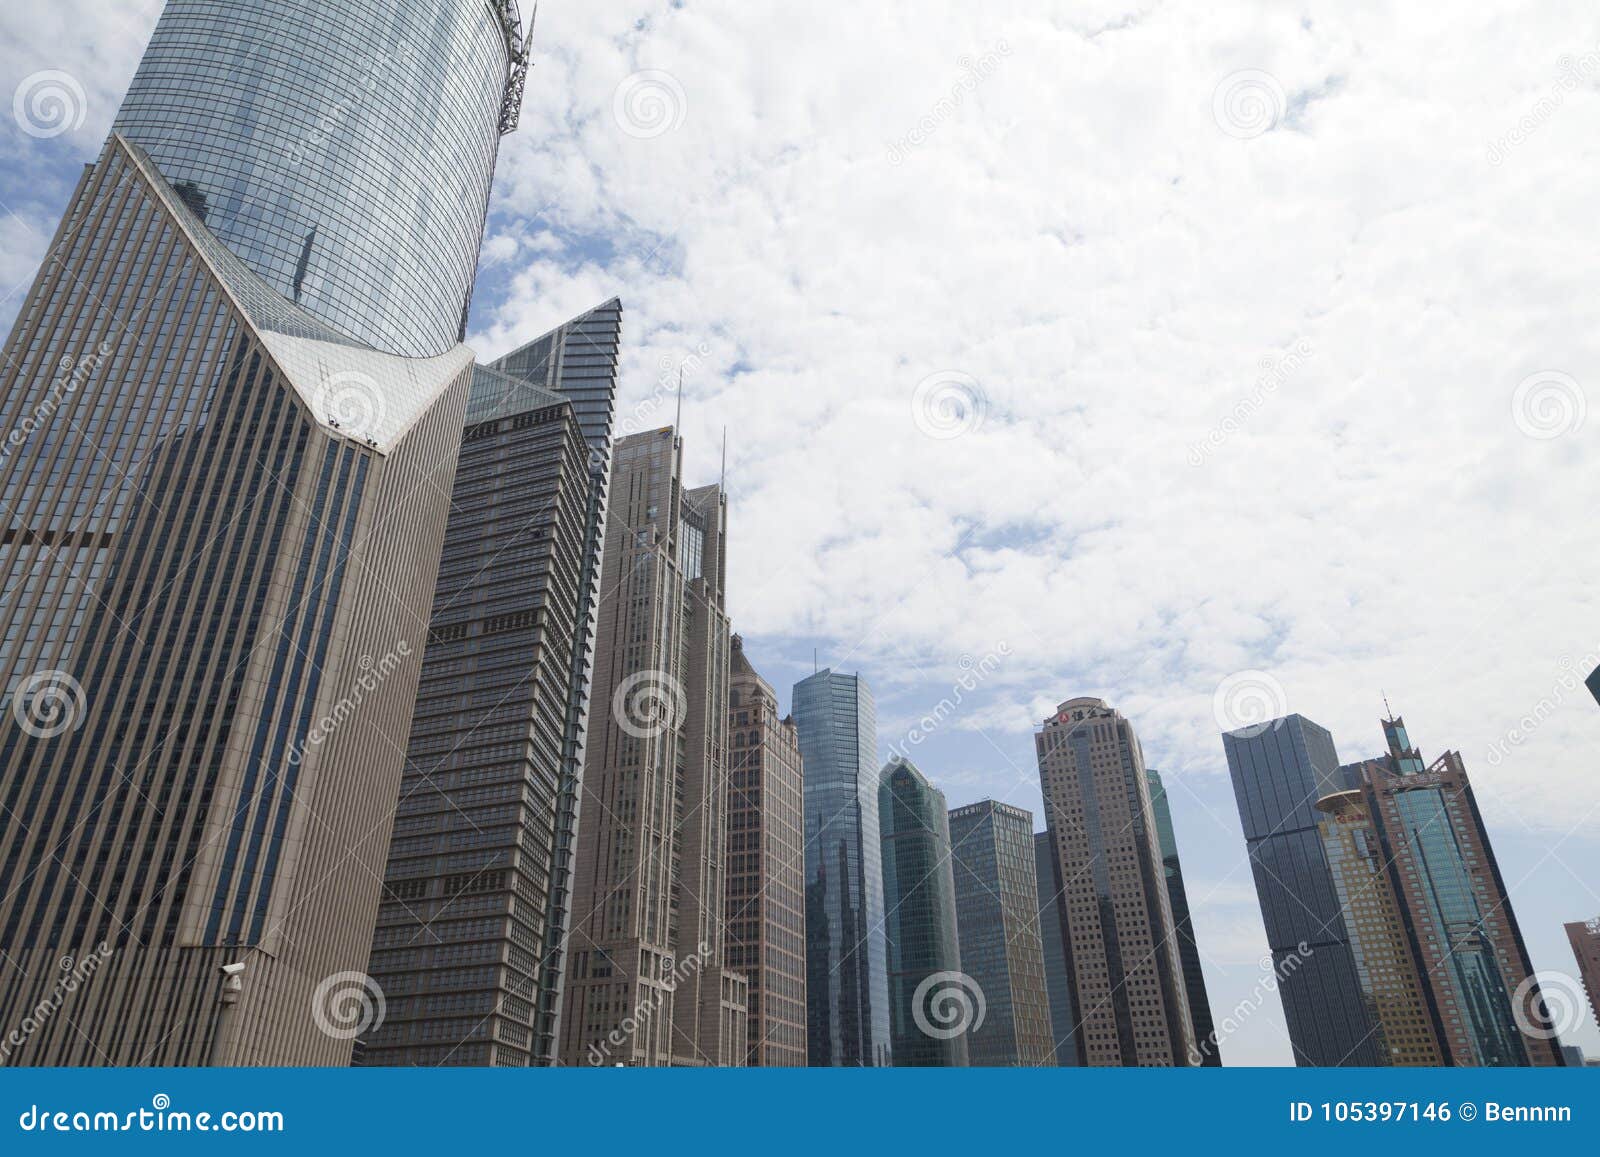 GoEoo 5x5ft Modern City Skyline Photo Backdrop Shanghai Skyscraper Financial Center Downtown Lankmark Airplane Buildings Cityscape Aircraft Photography Background Photo Studio Props 